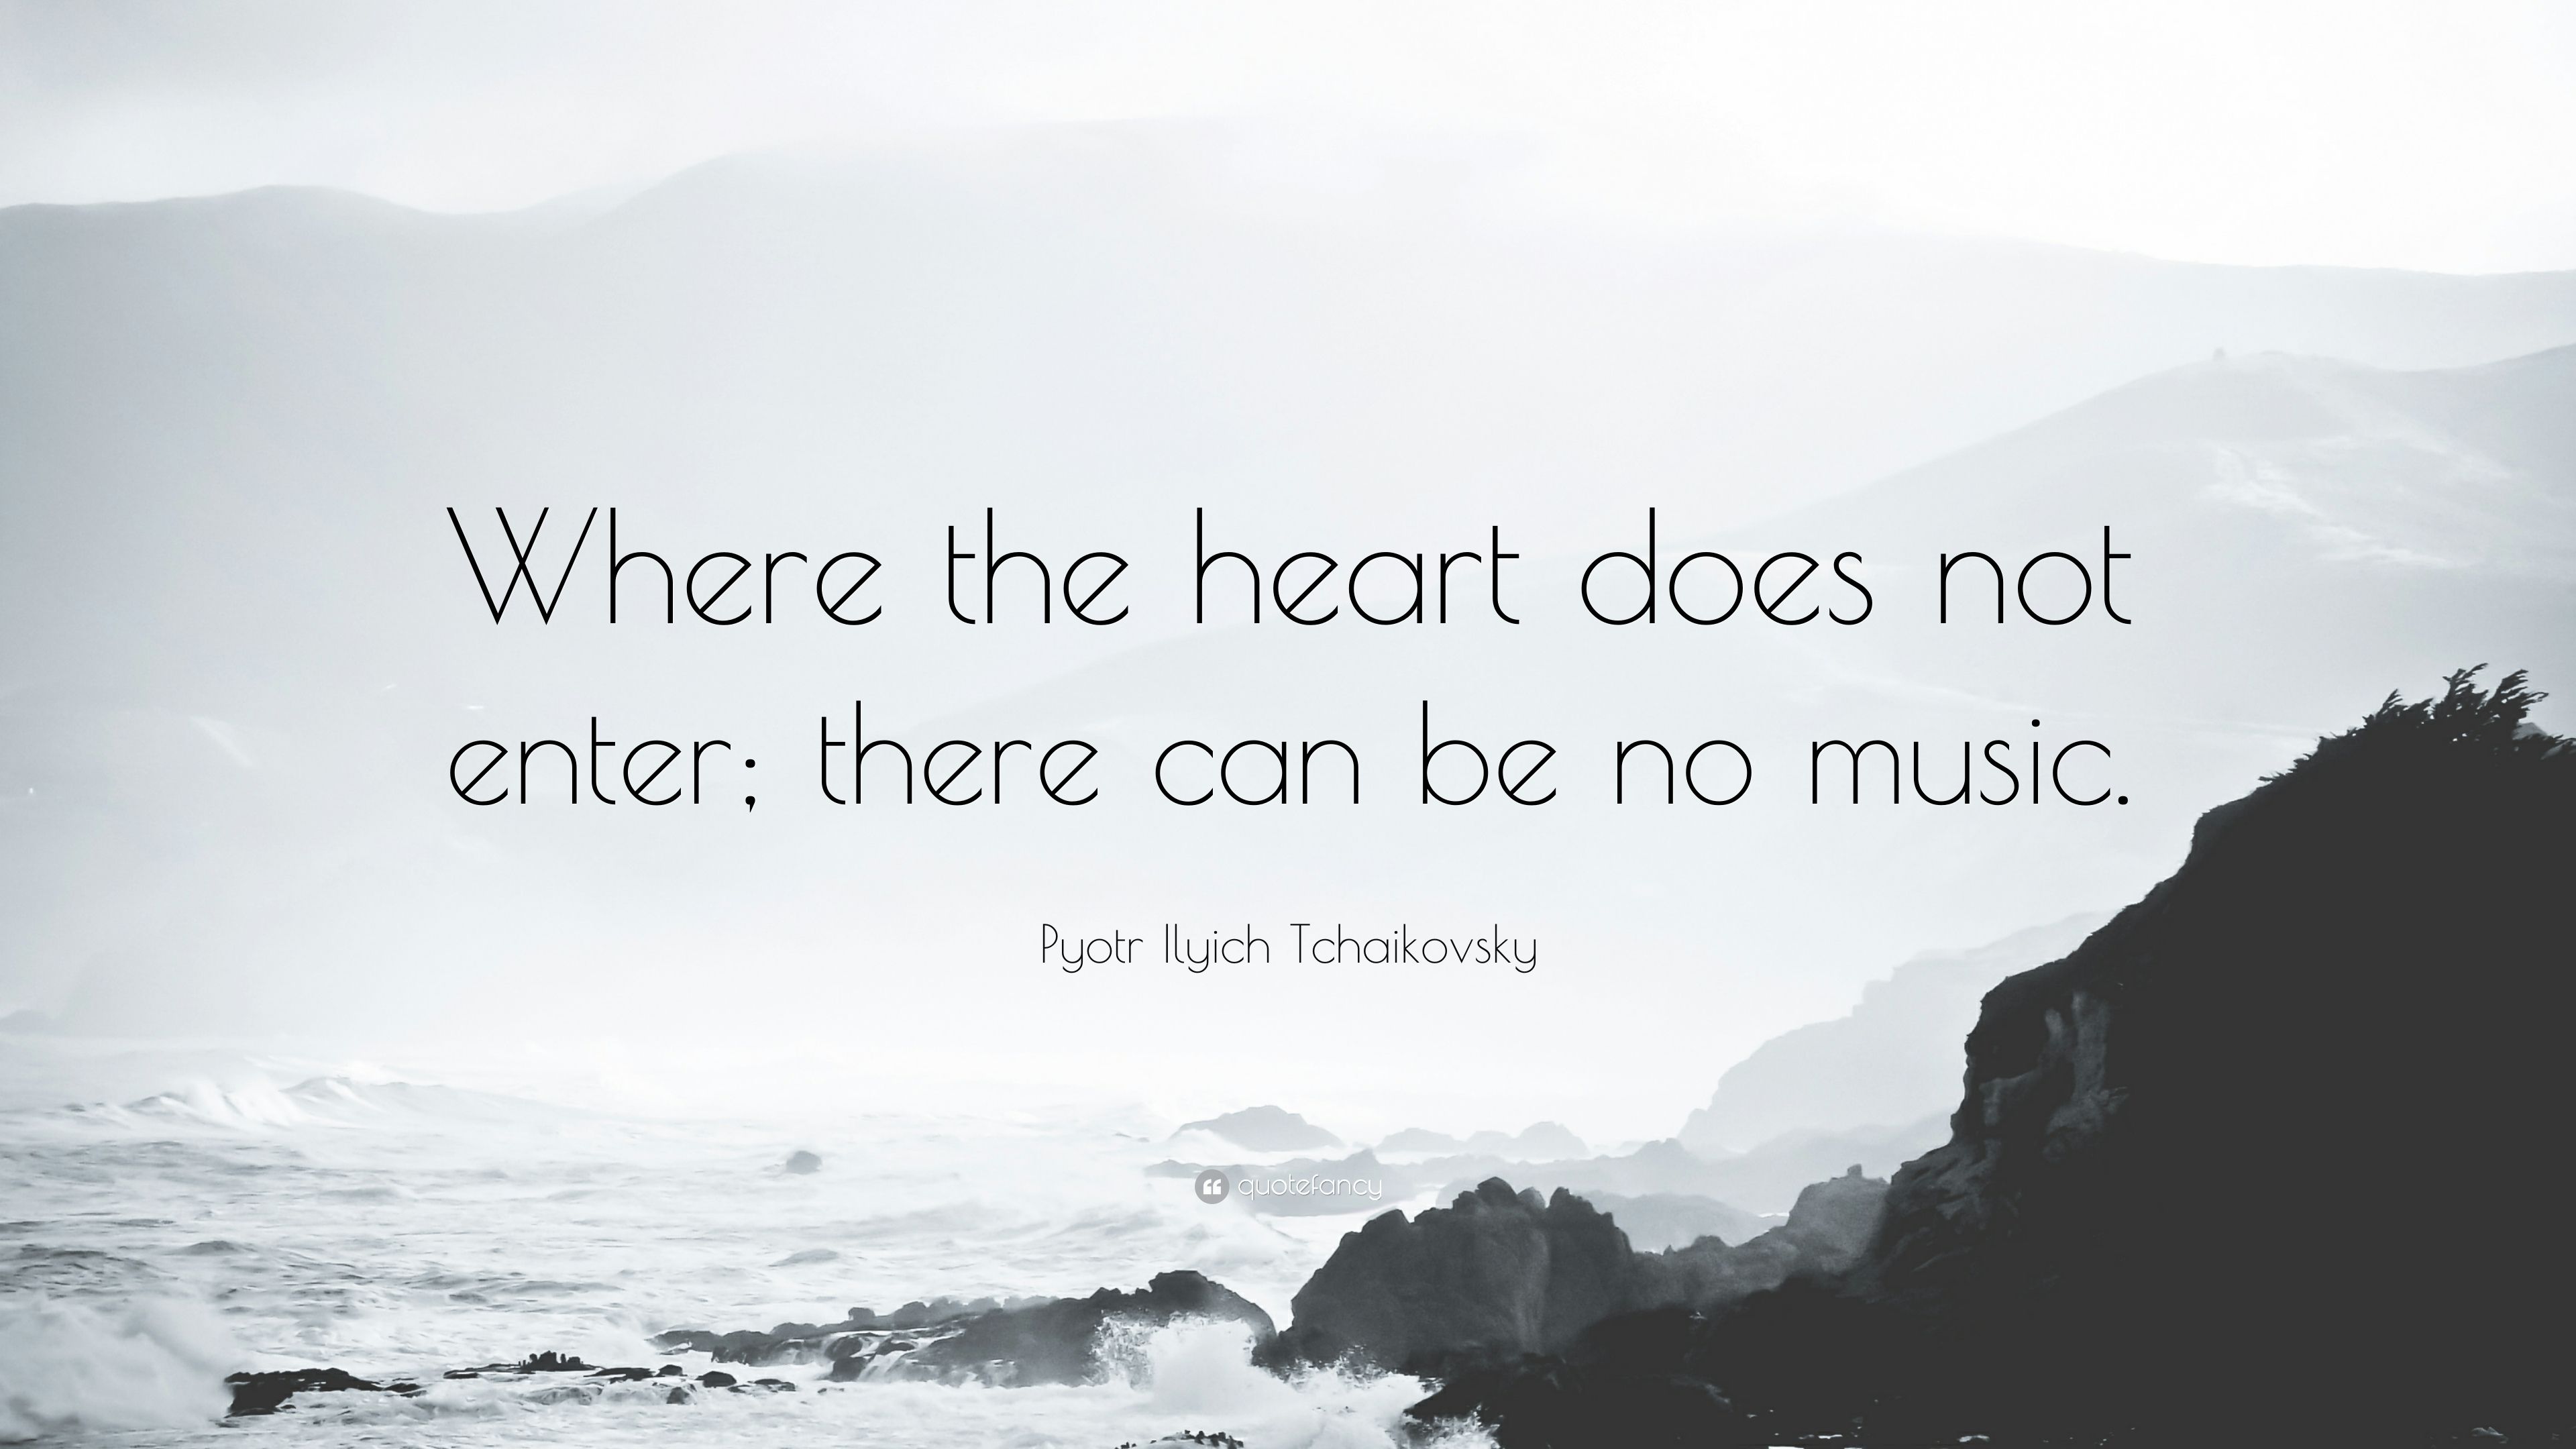 Pyotr Ilyich Tchaikovsky Quote: “Where the heart does not enter; there can be no music.” (7 wallpaper)